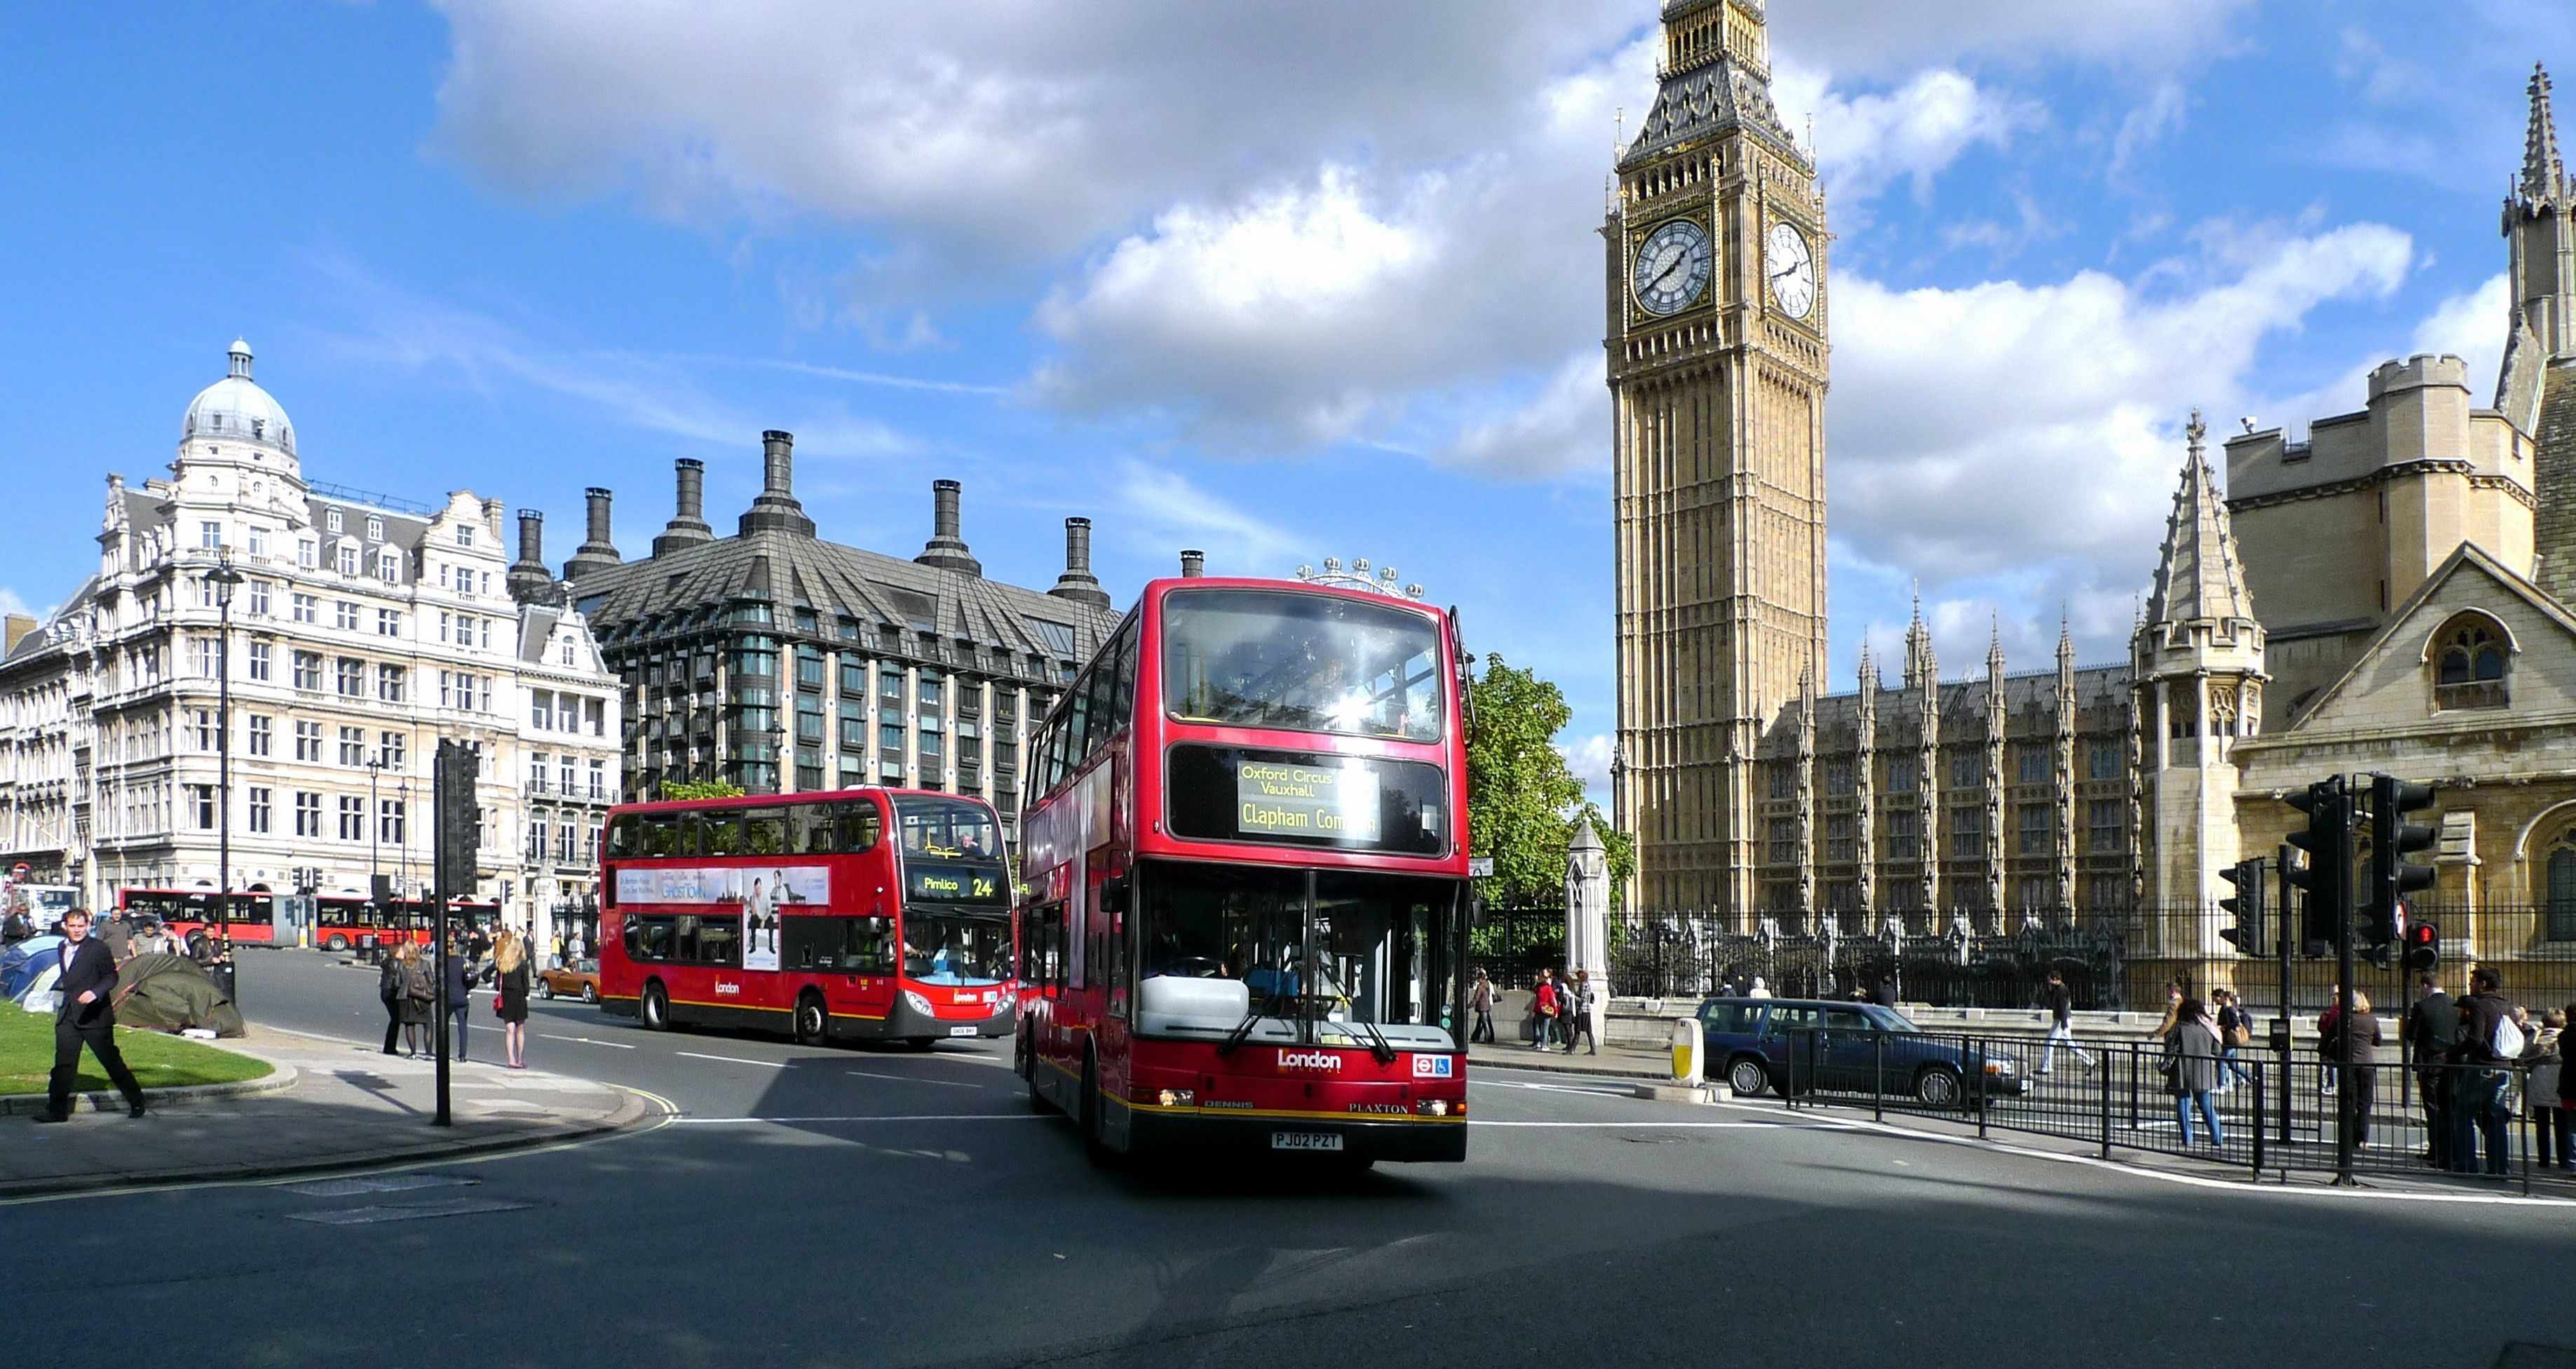 London Wallpaper for Computer Full HD Pictures